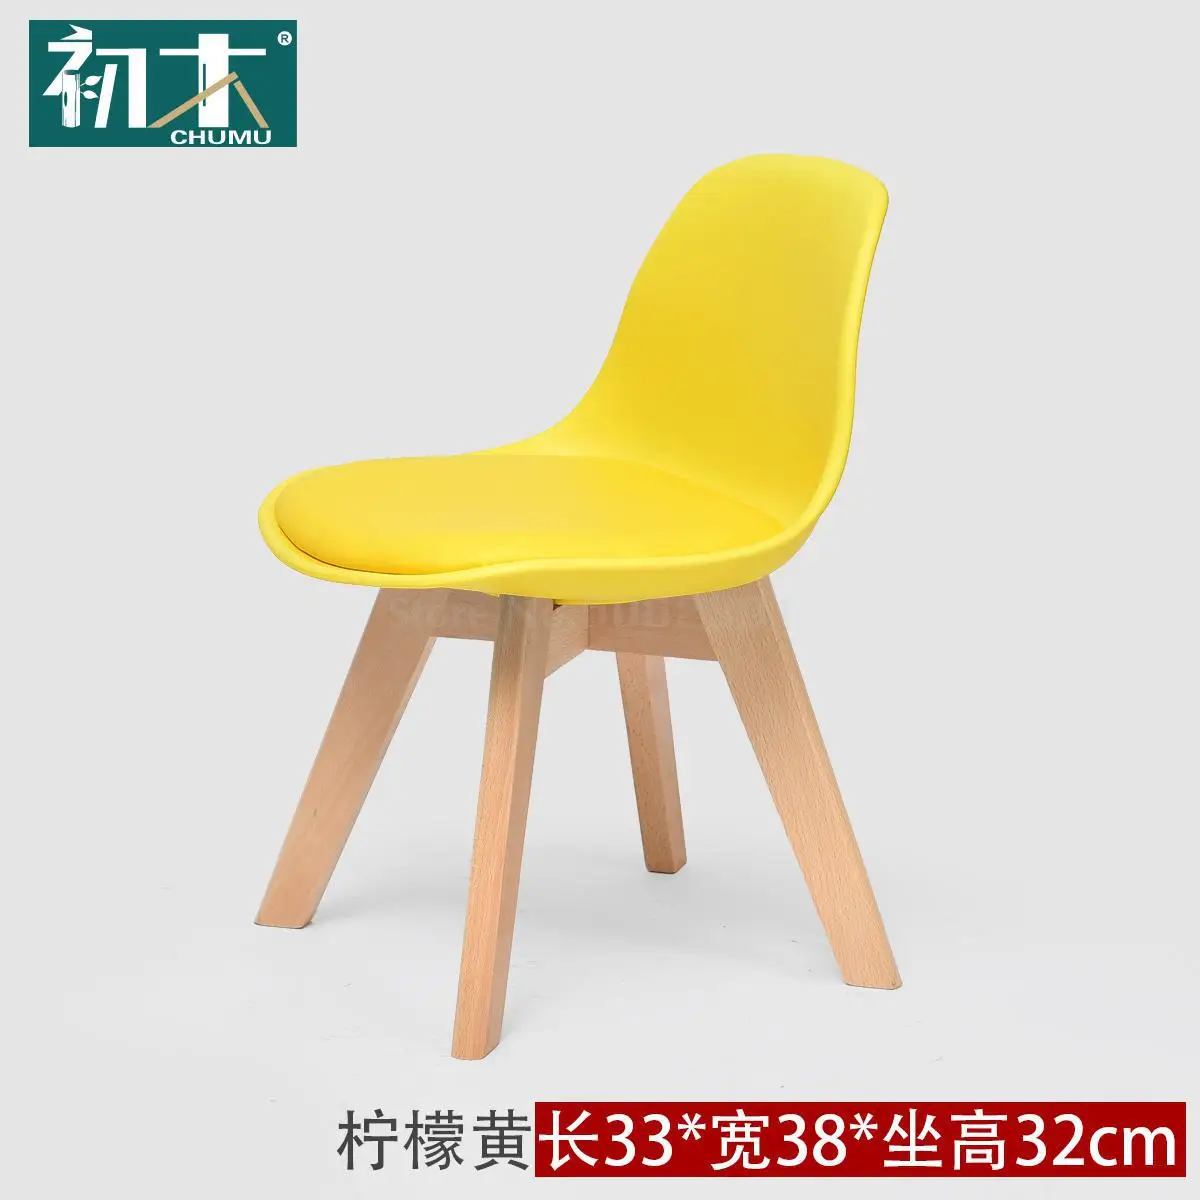 Solid wood children's chair home work chair kindergarten baby dining chair study primary school backrest chair - Цвет: Same as picture 8